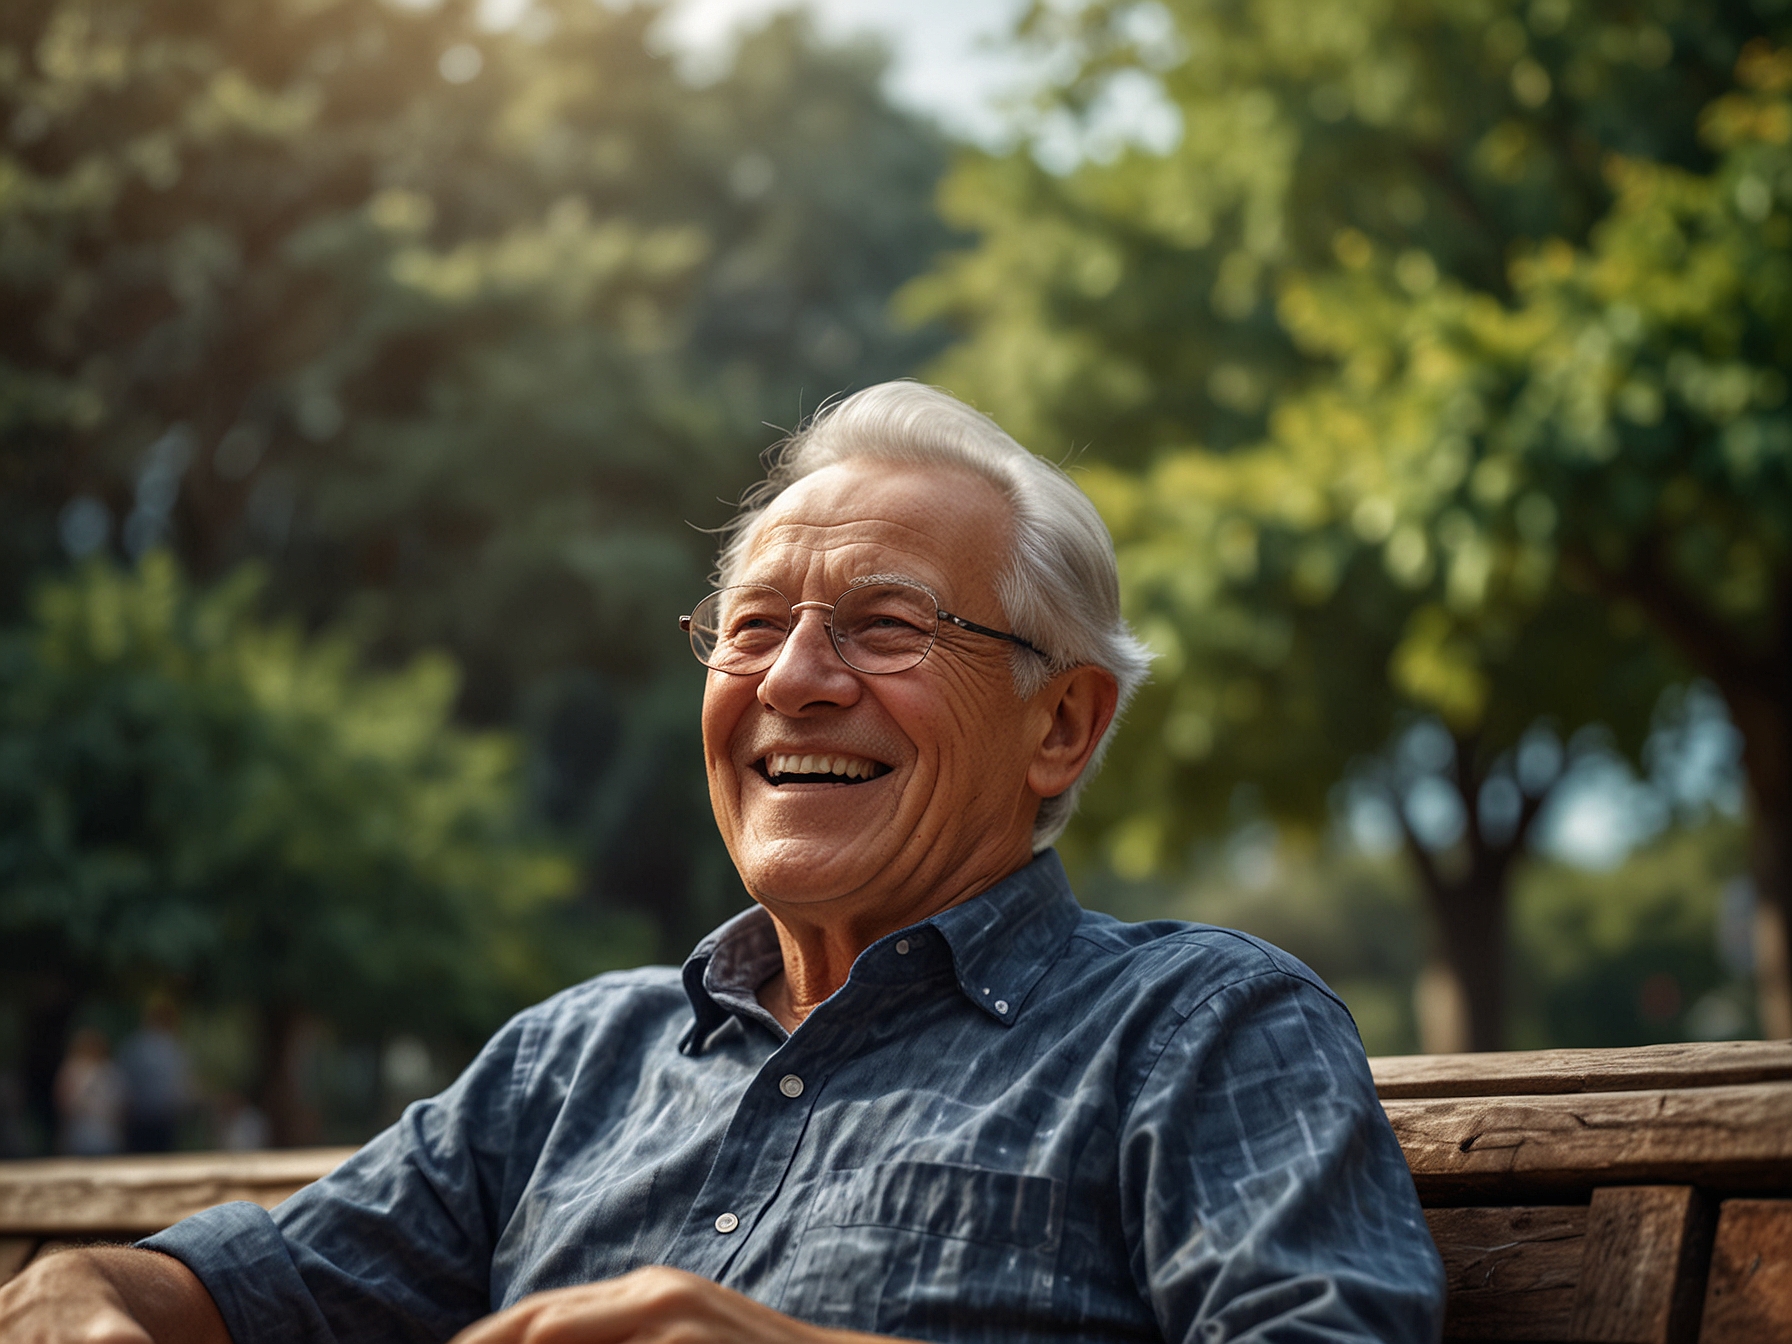 A happy retiree enjoying leisure time, symbolizing successful retirement planning and financial security achieved through smart investments and living within means.